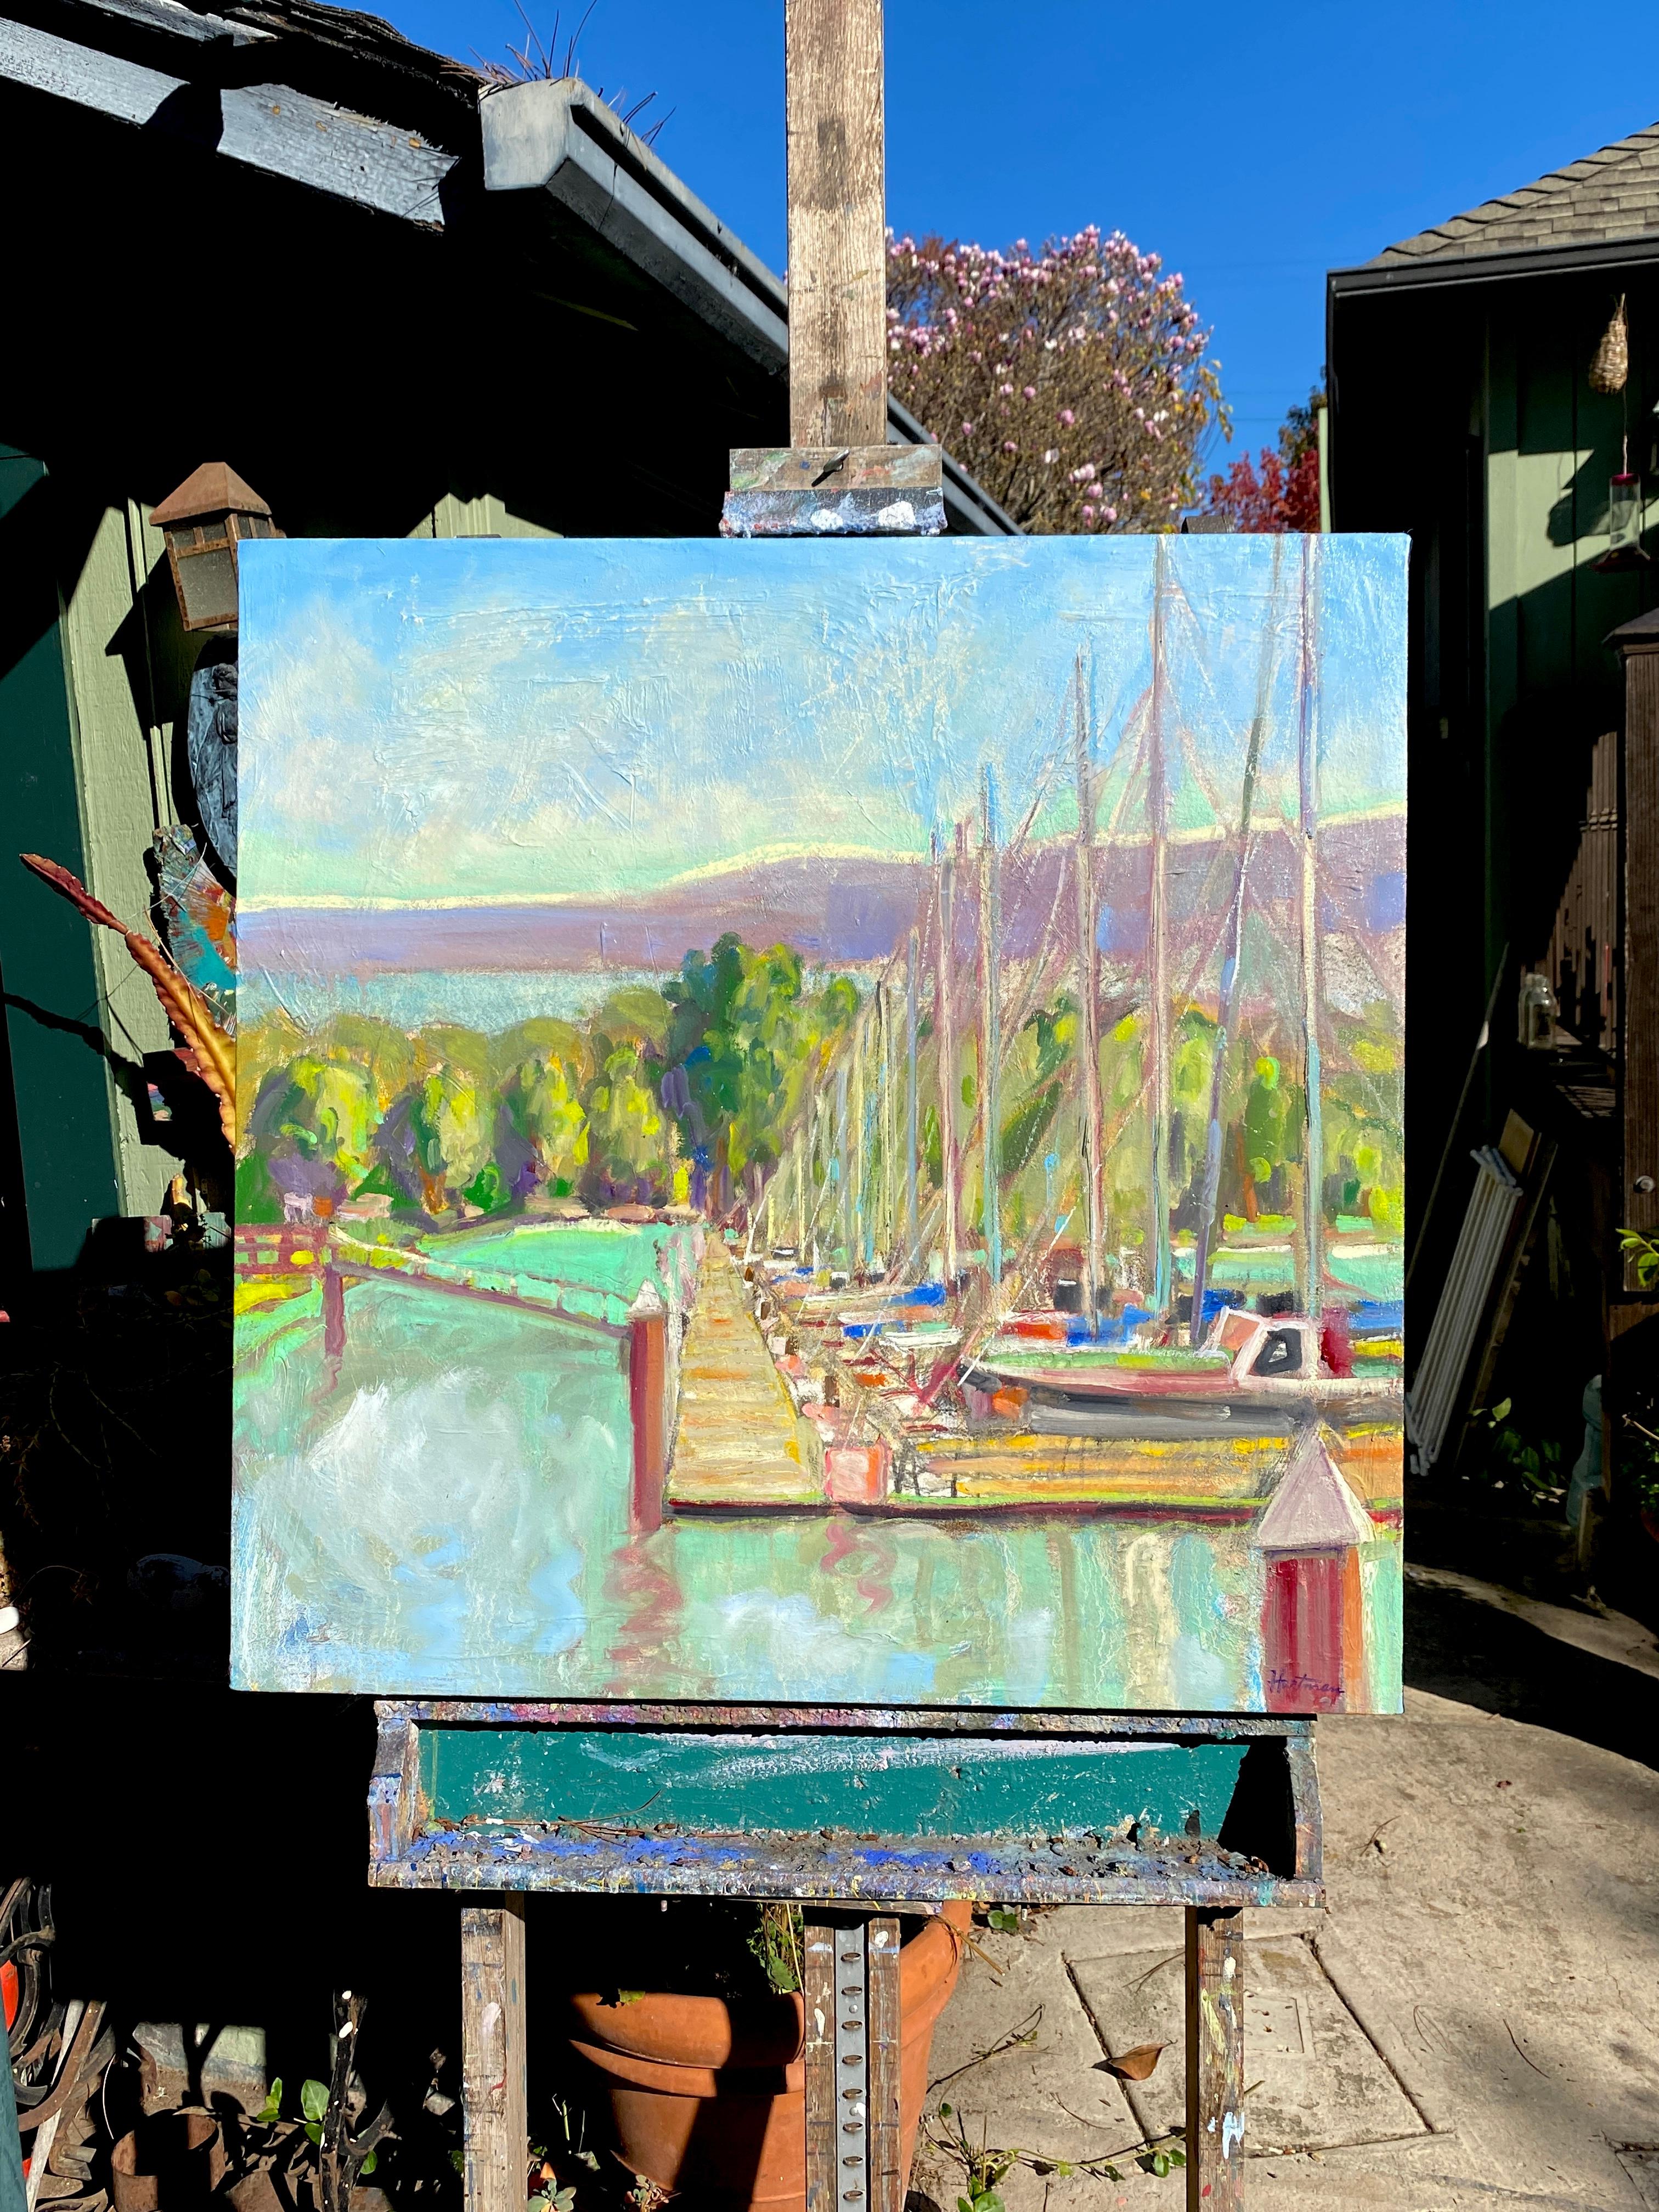 <p>Artist Comments<br>Artist James Hartman depicts a group of sailboats docked neatly on the harbor. Glistening turquoise waters sway gently before a vivid green forest. Broken colors of red, blue, and yellow accentuate the boats and masts as they